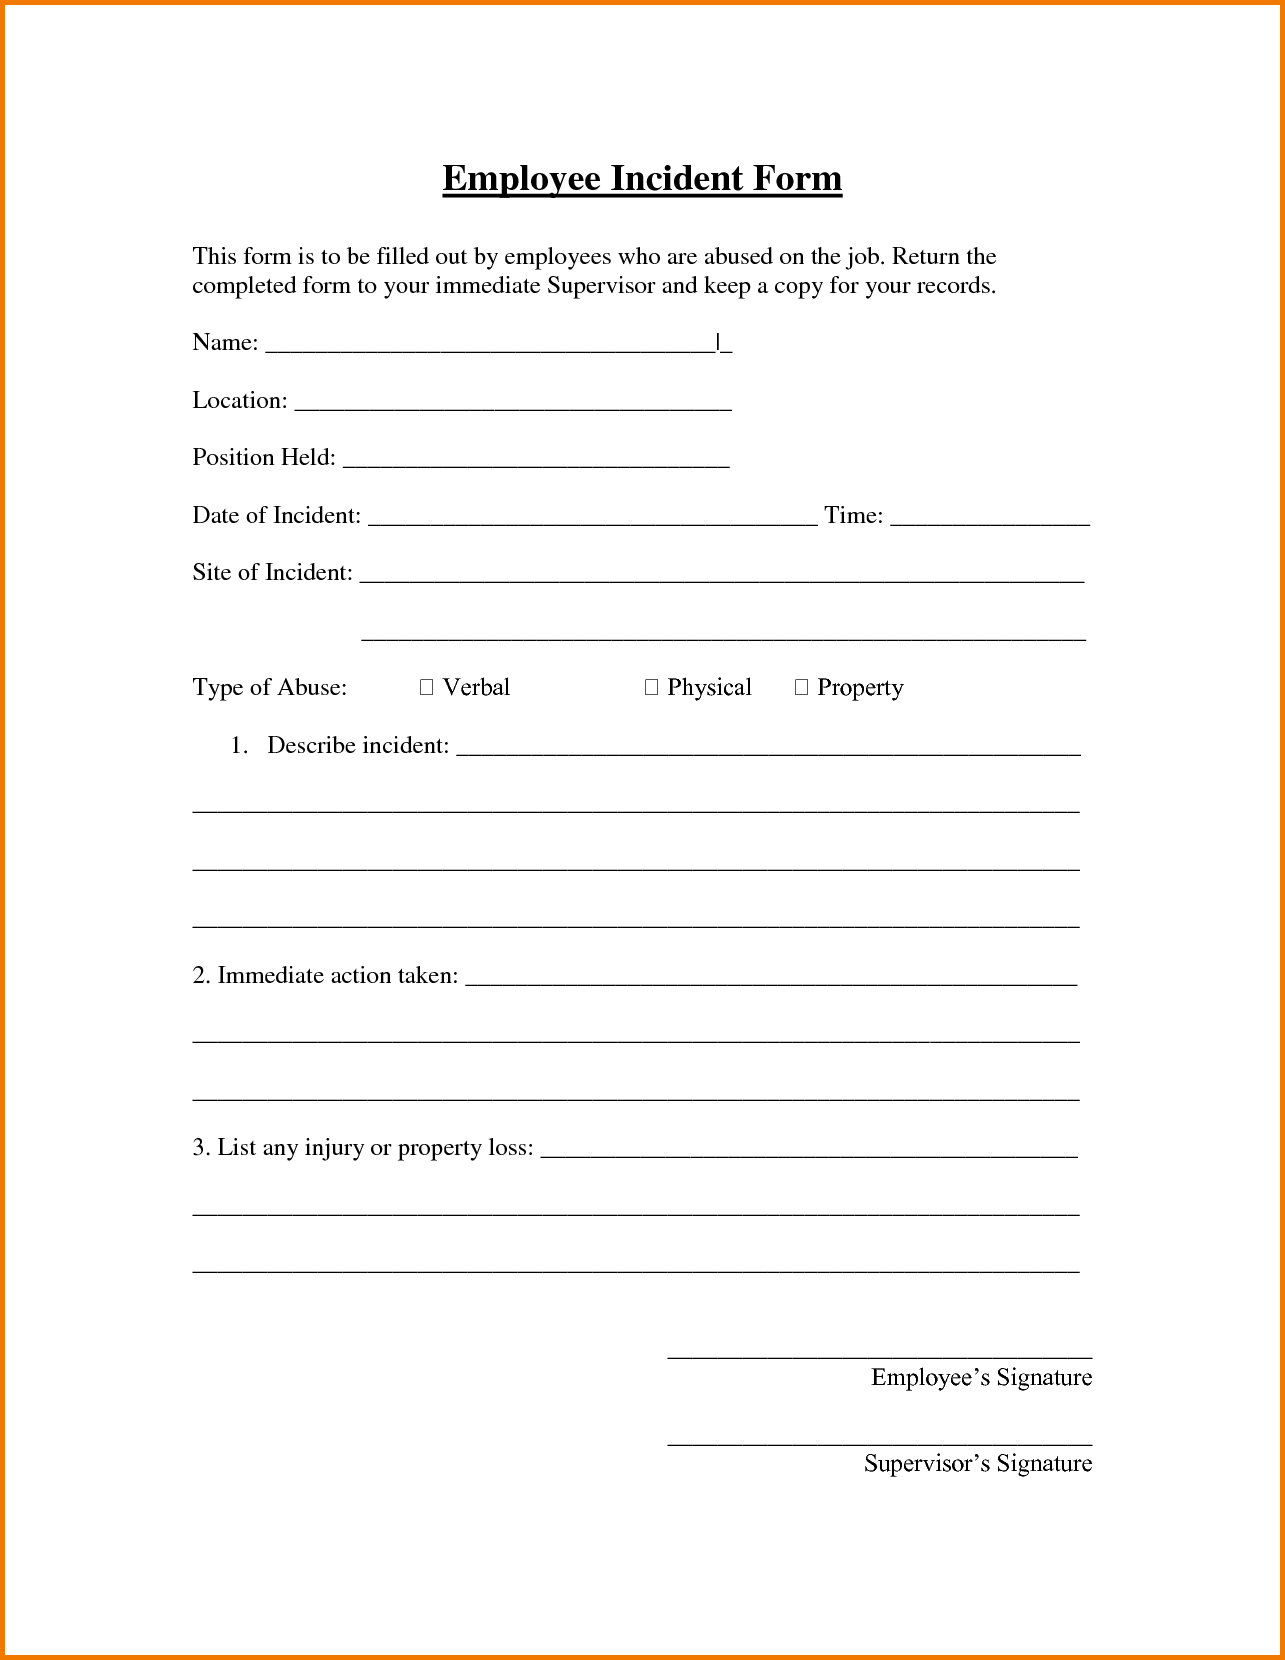 generic employee incident report form   Boat.jeremyeaton.co